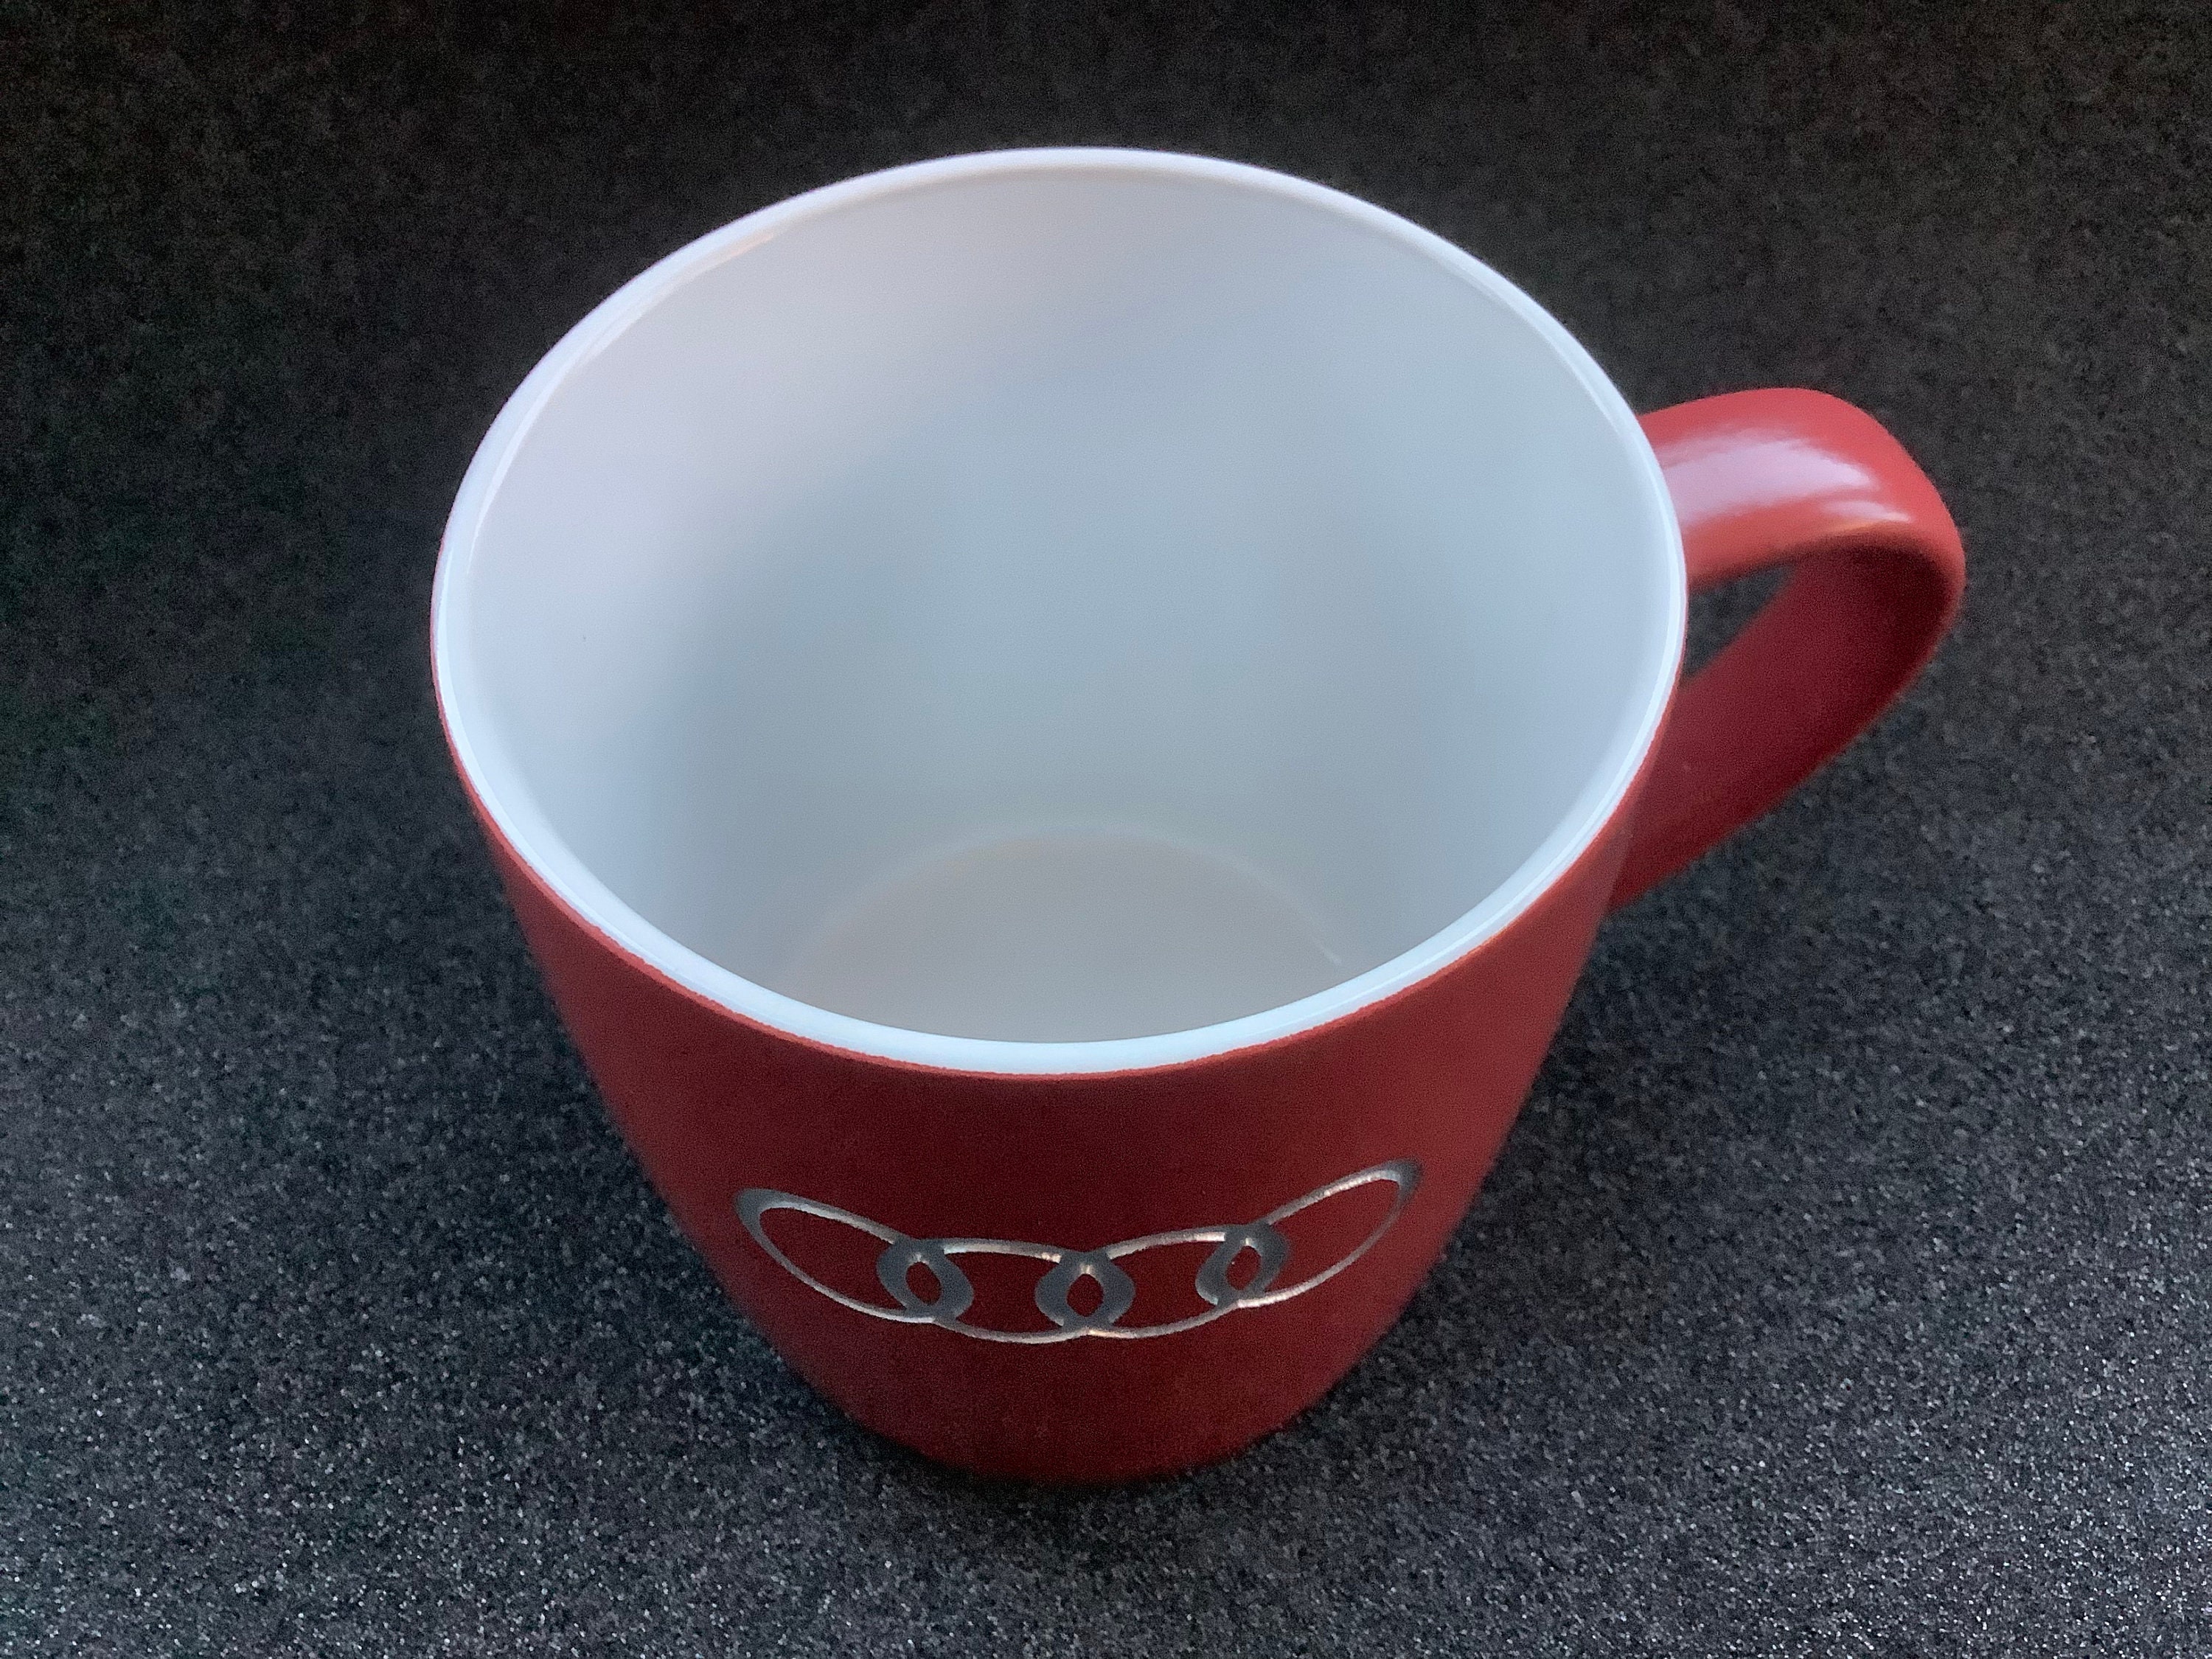 S-LINE CERAMIC MUG IDEAL GIFT PERSONALISED IF REQUIRED AUDI S LINE 